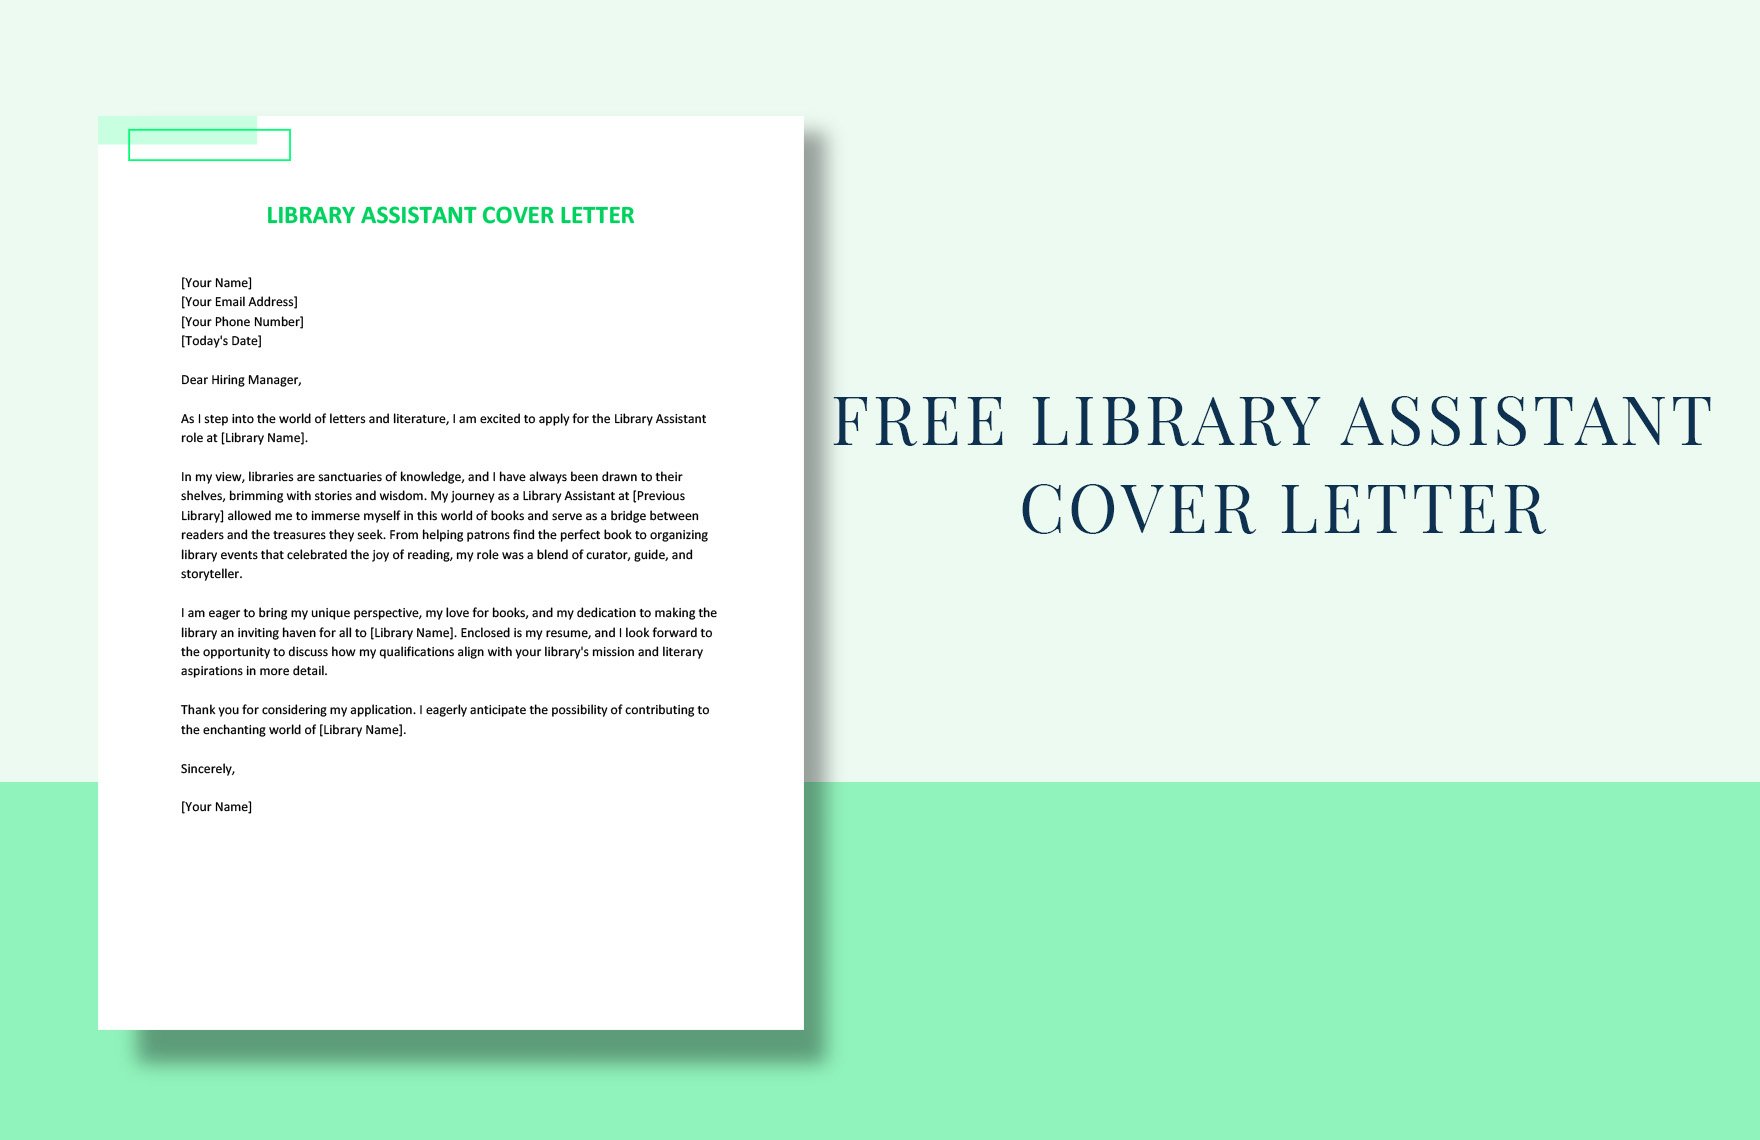 Library Assistant Cover Letter in Word, Google Docs